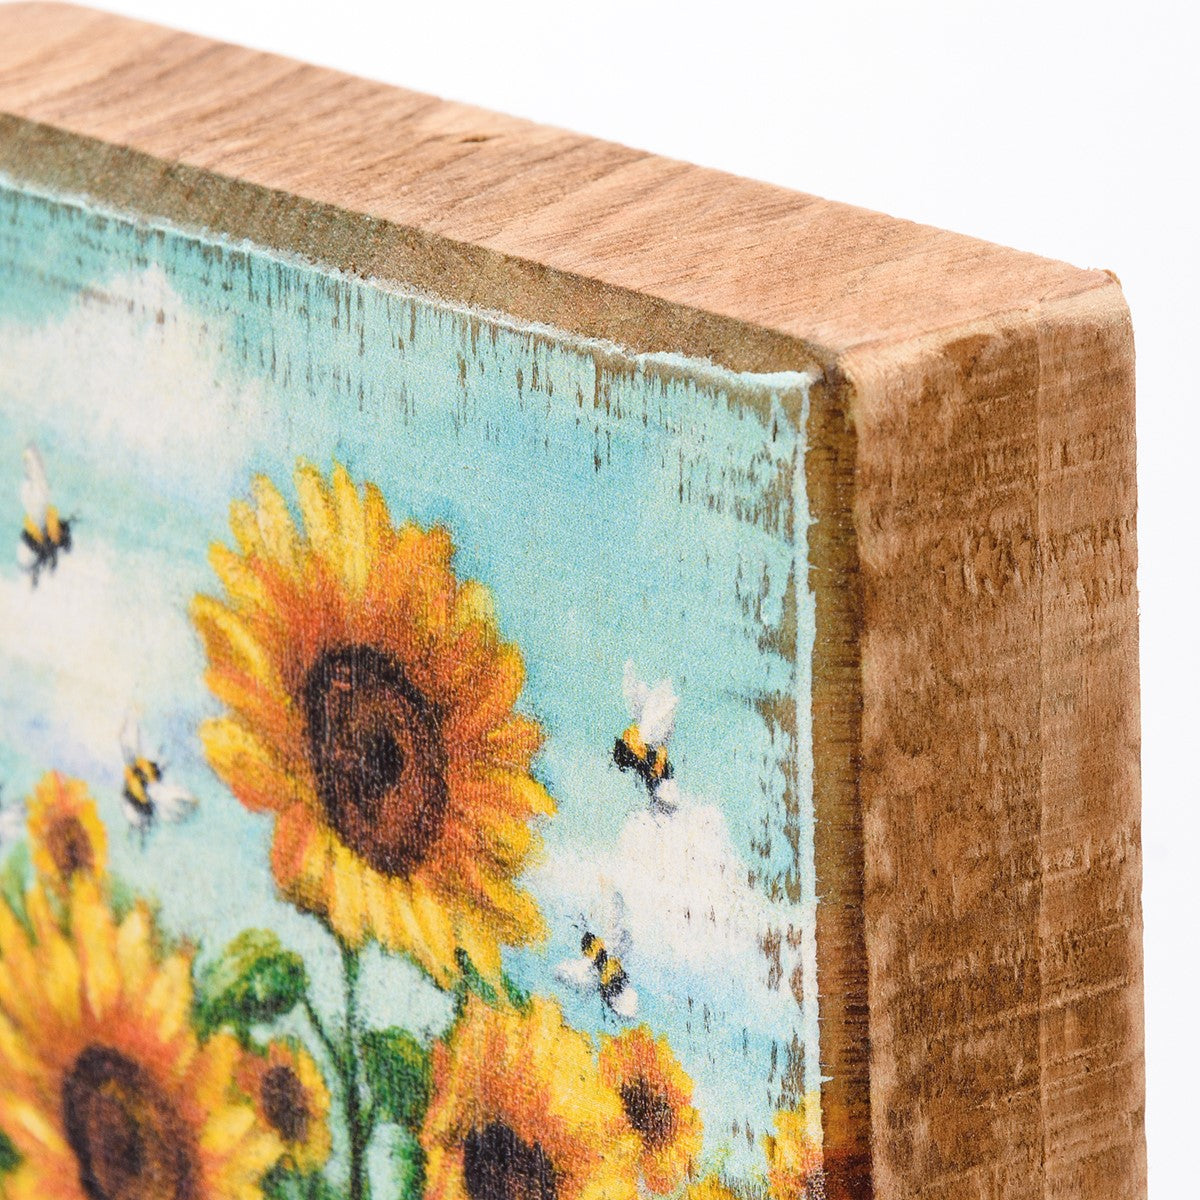 Sunflowers In Field 4" Small Wooden Block Sign